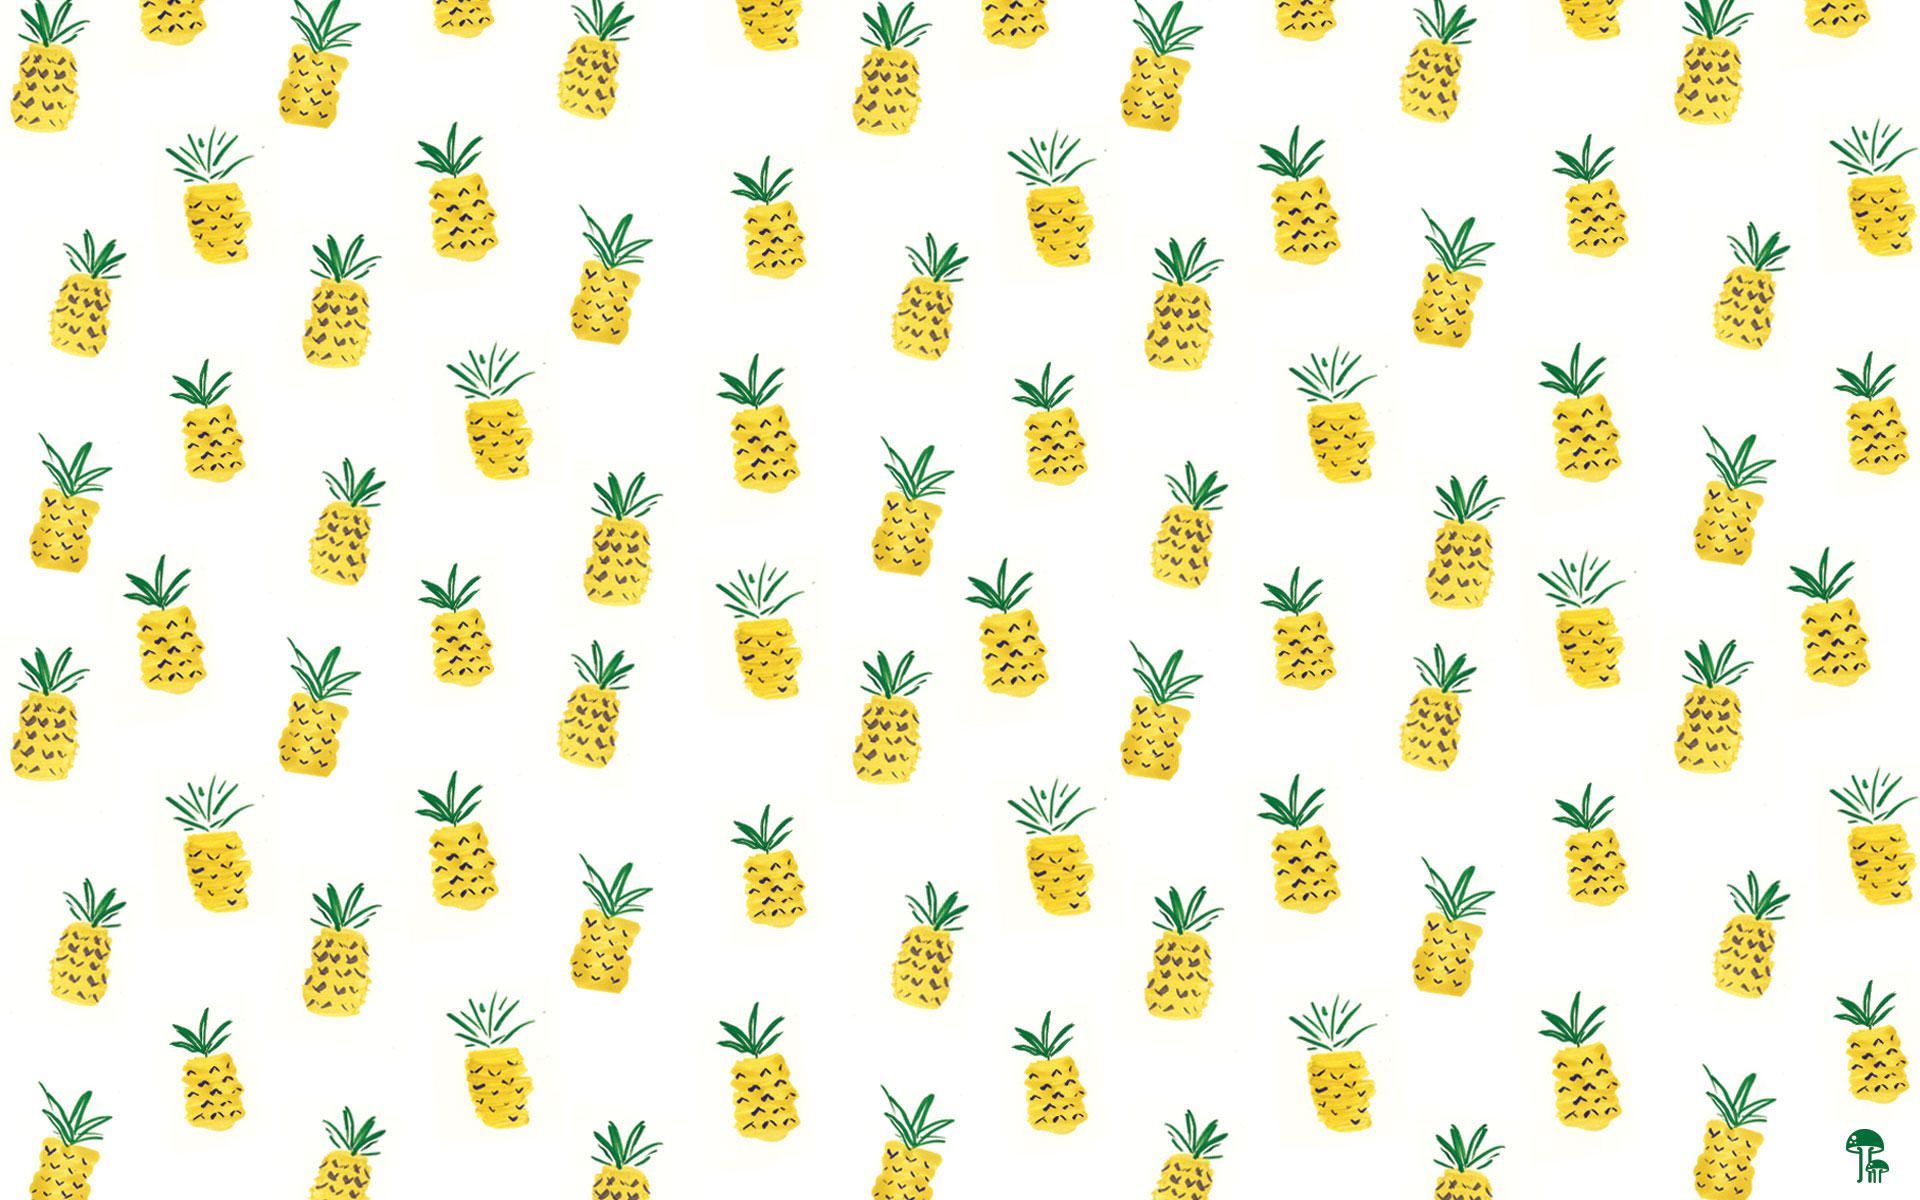 30 of the Sweetest Desktop and Smartphone Pineapple Wallpapers   Inspirationfeed